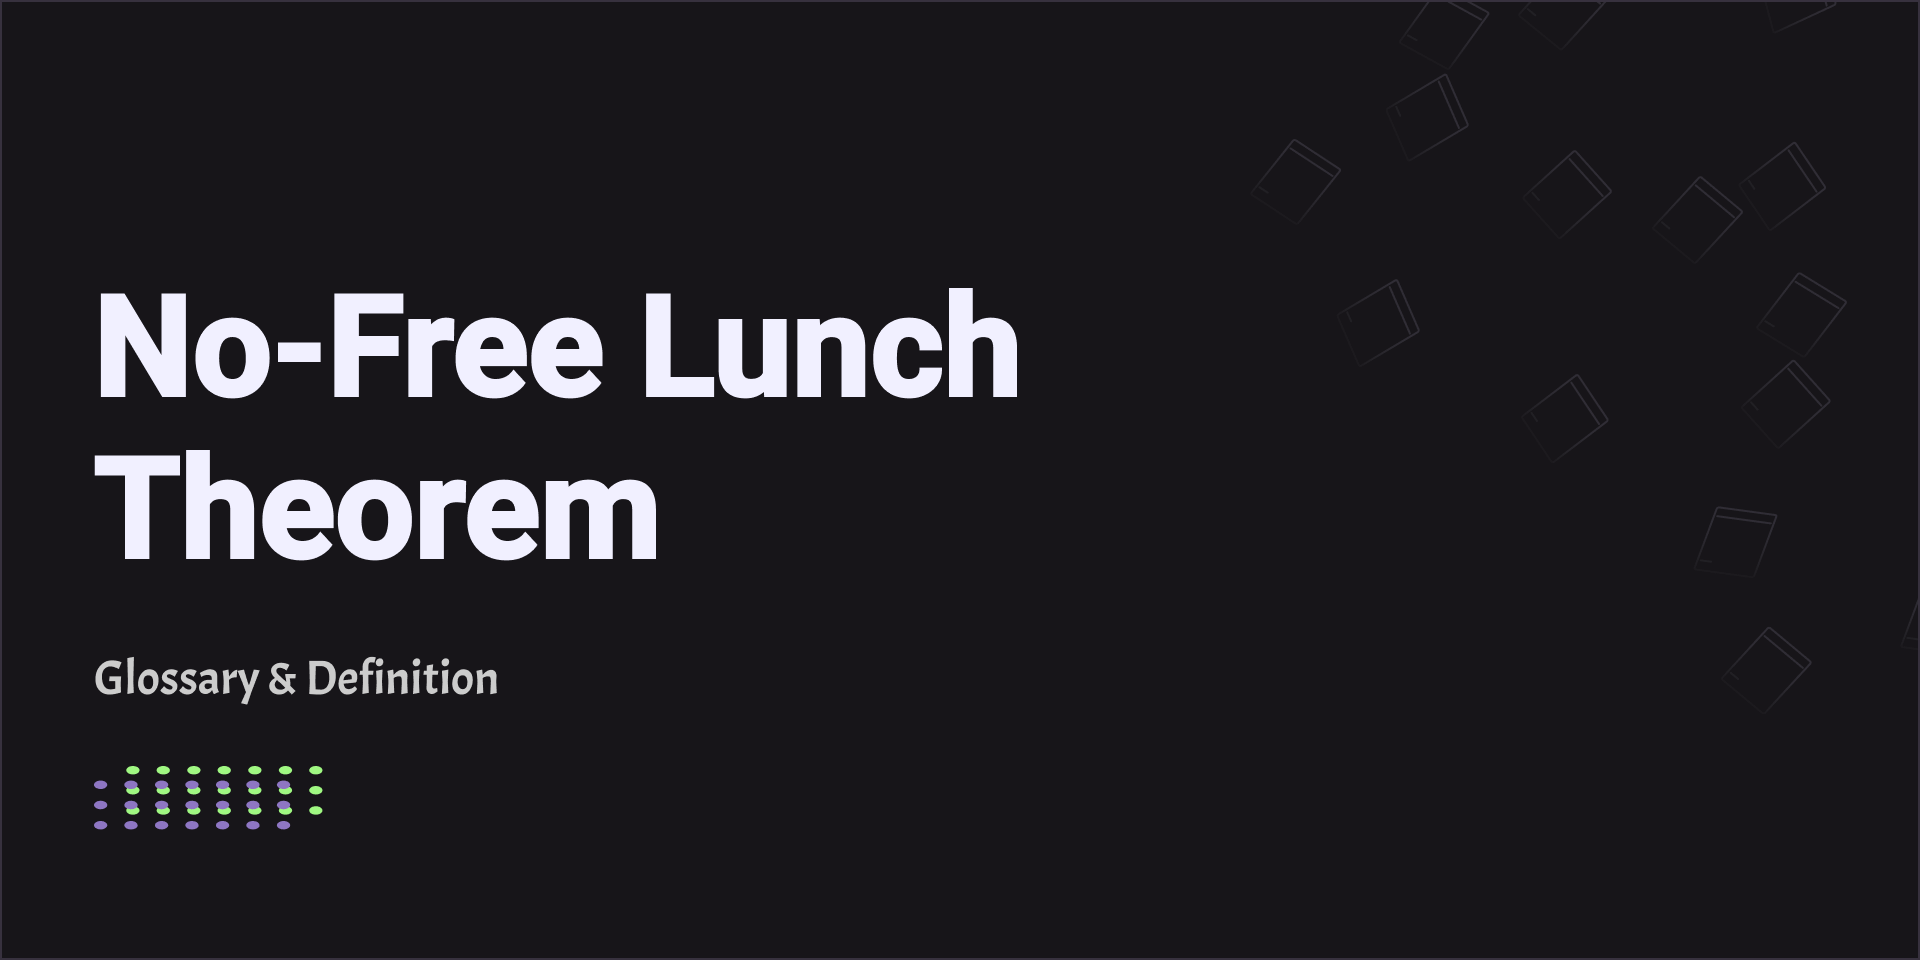 No-Free Lunch Theorem